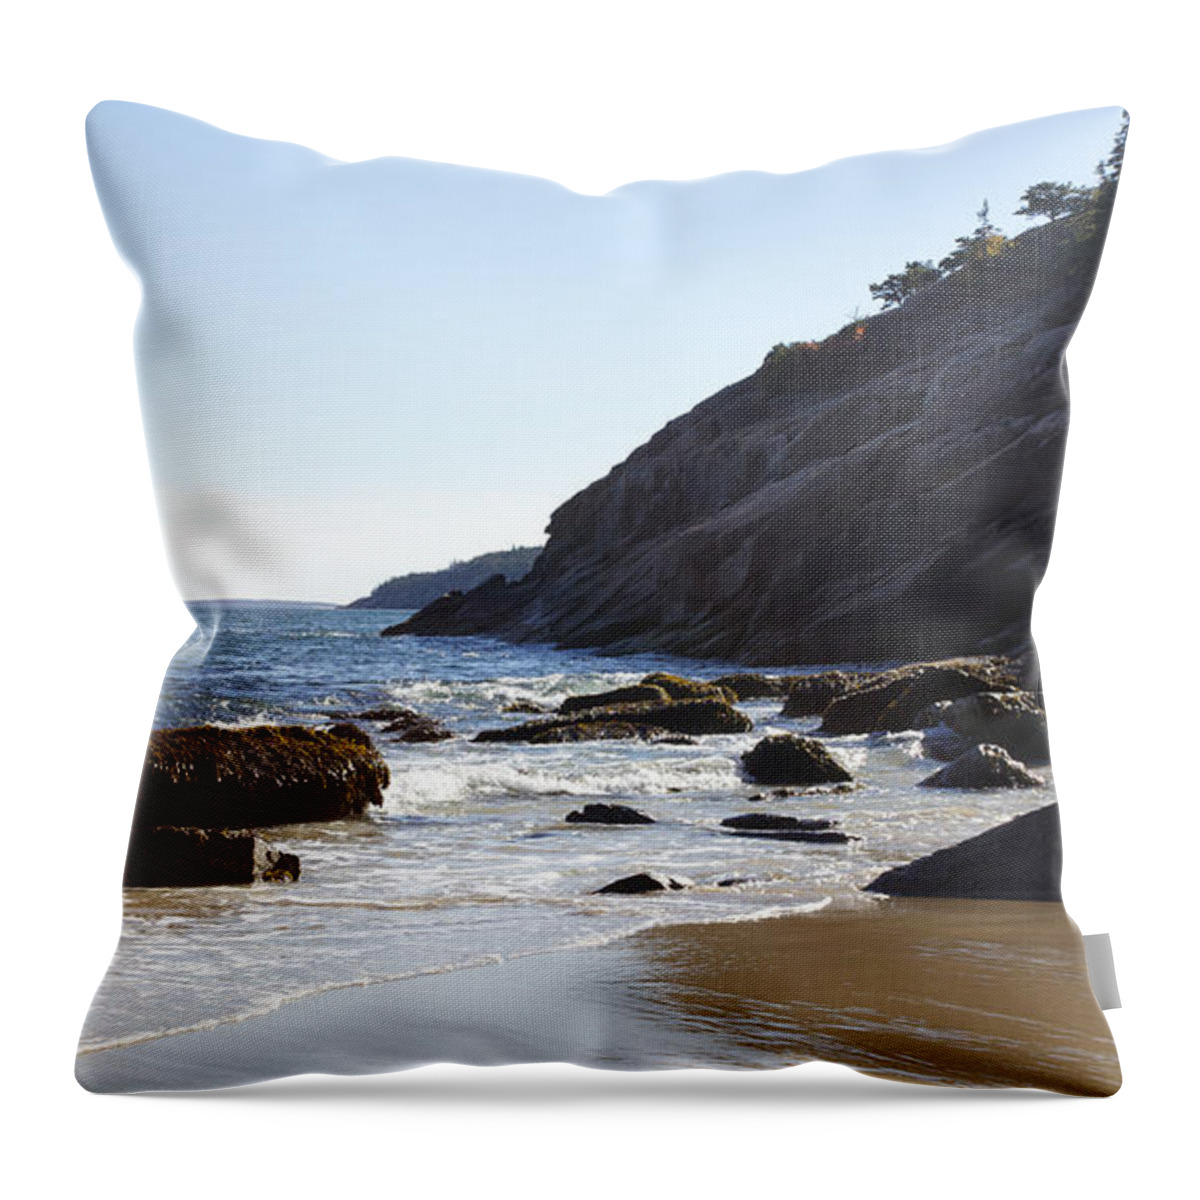  Throw Pillow featuring the photograph Acadia National Park #3 by John Daly